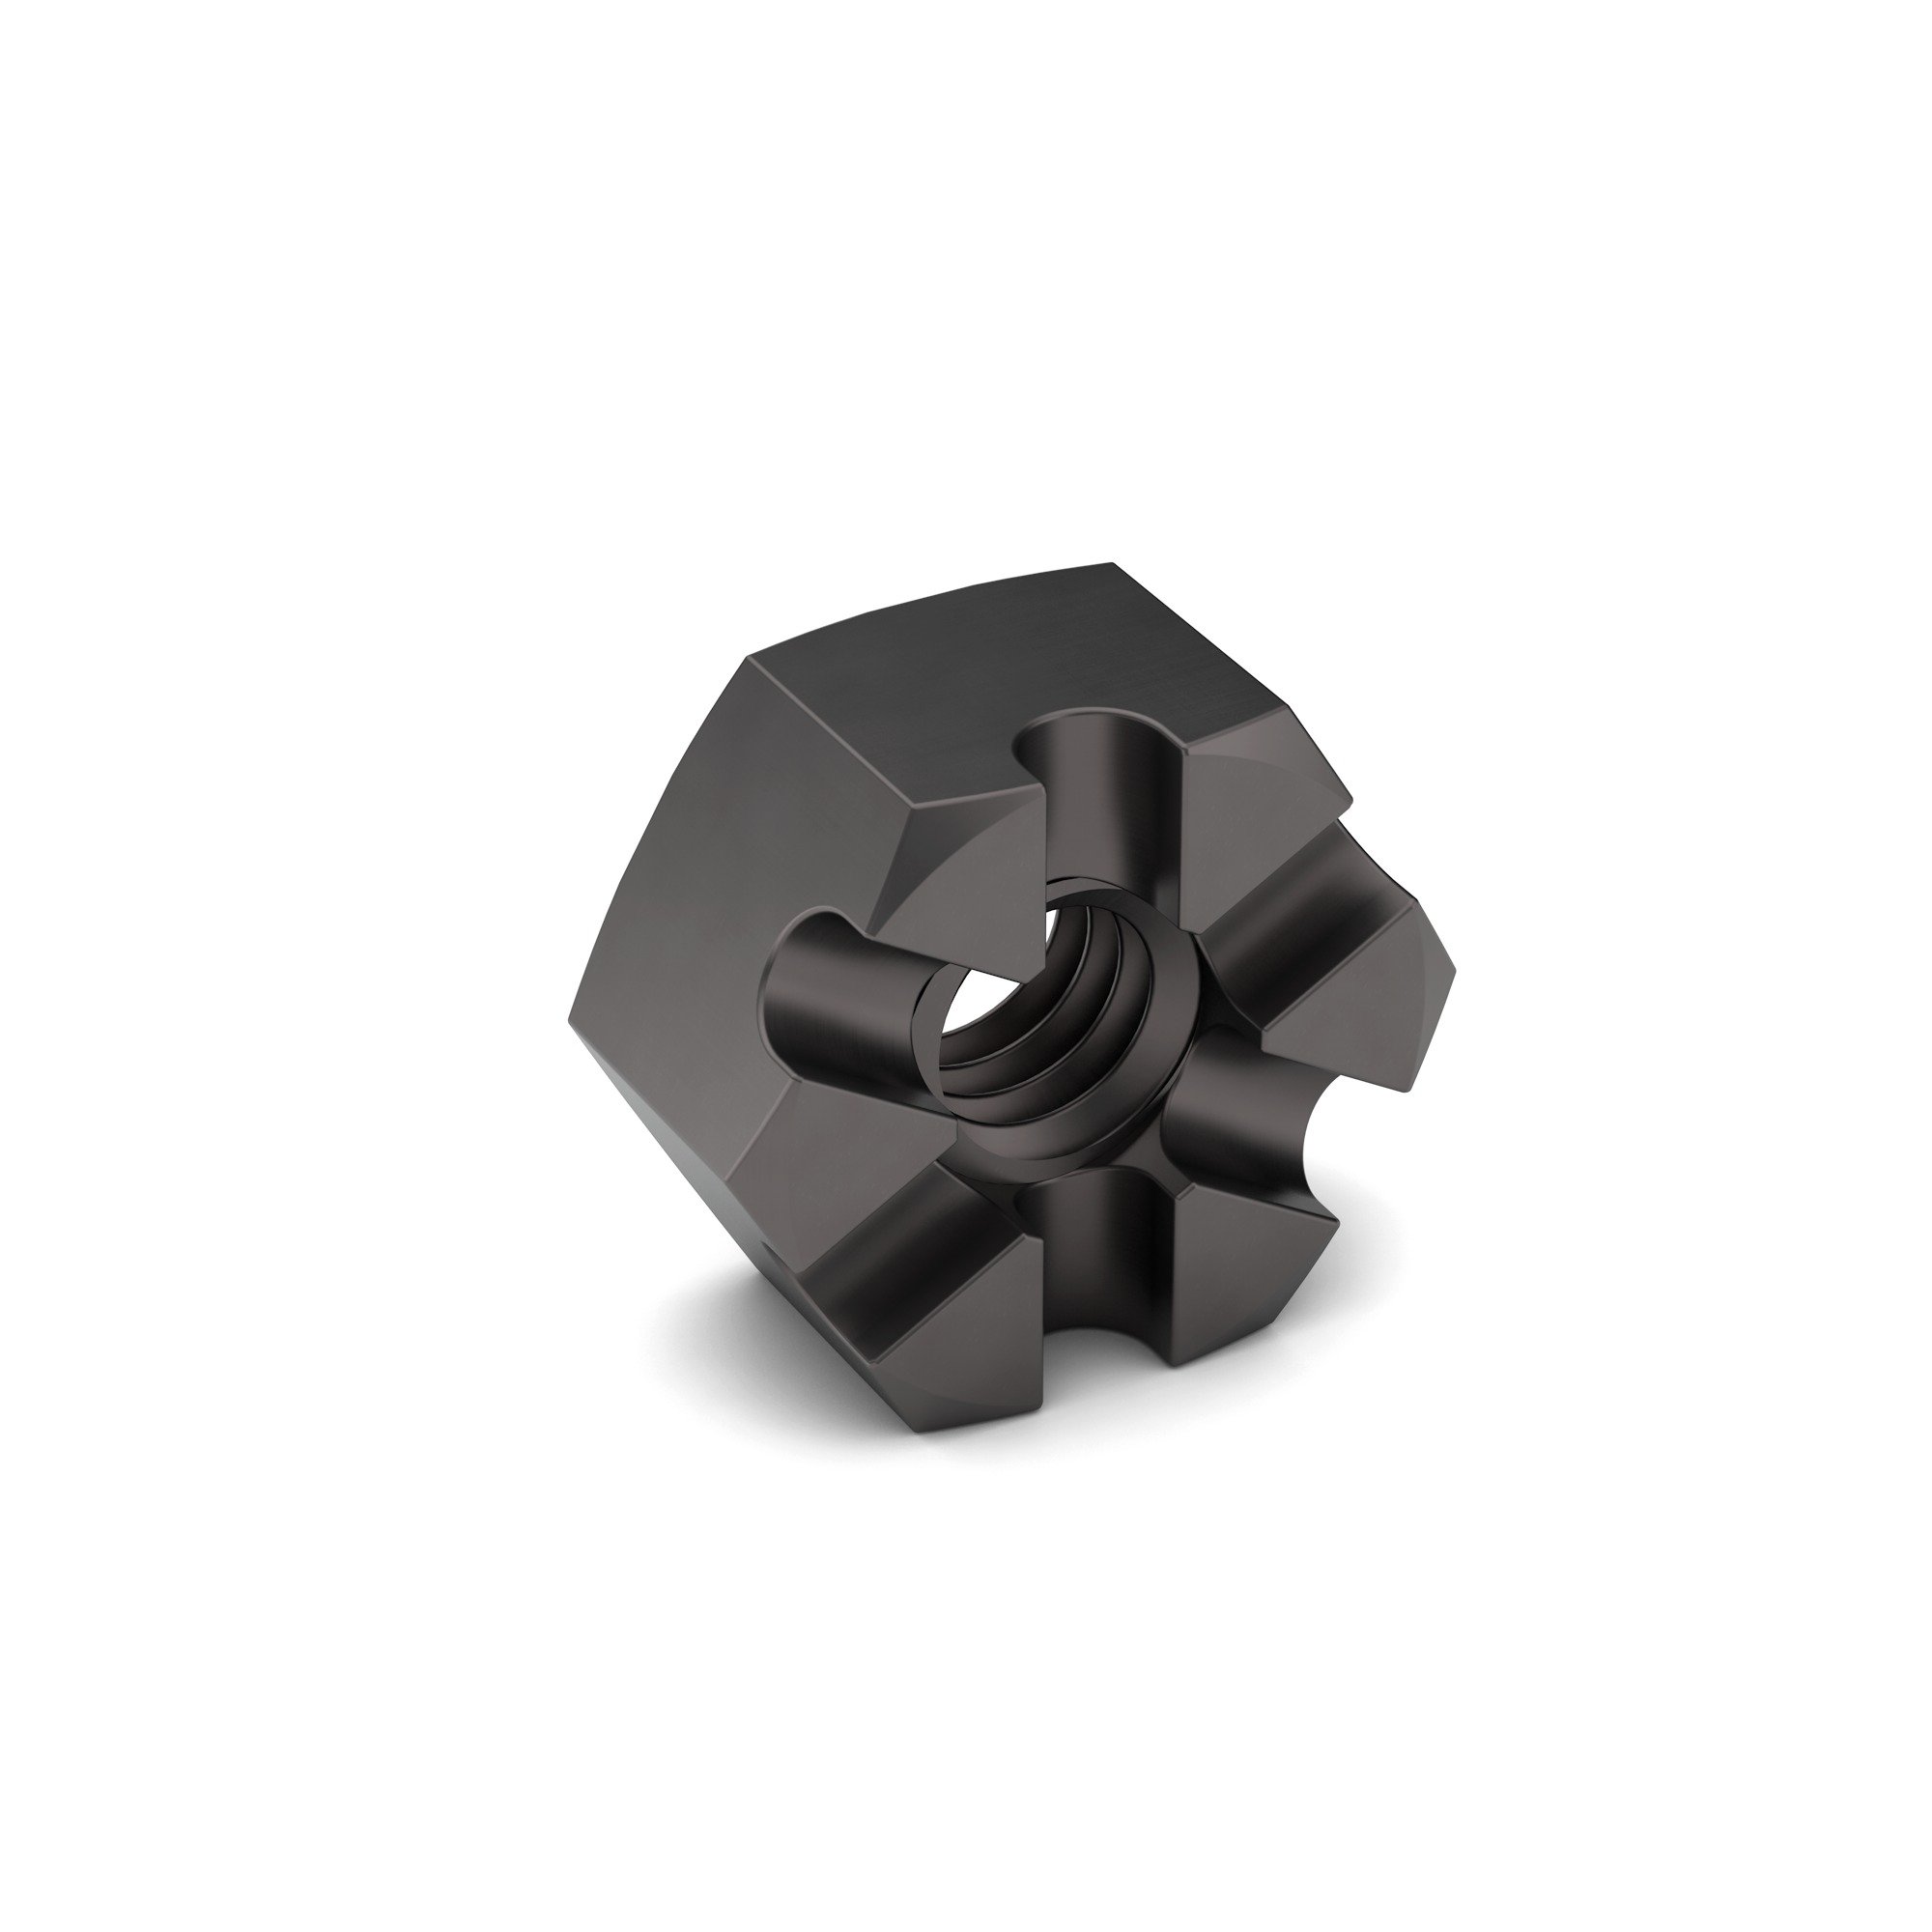 1 3/4-5 GR 5 Heavy Hex Slotted Nut Plain Finish